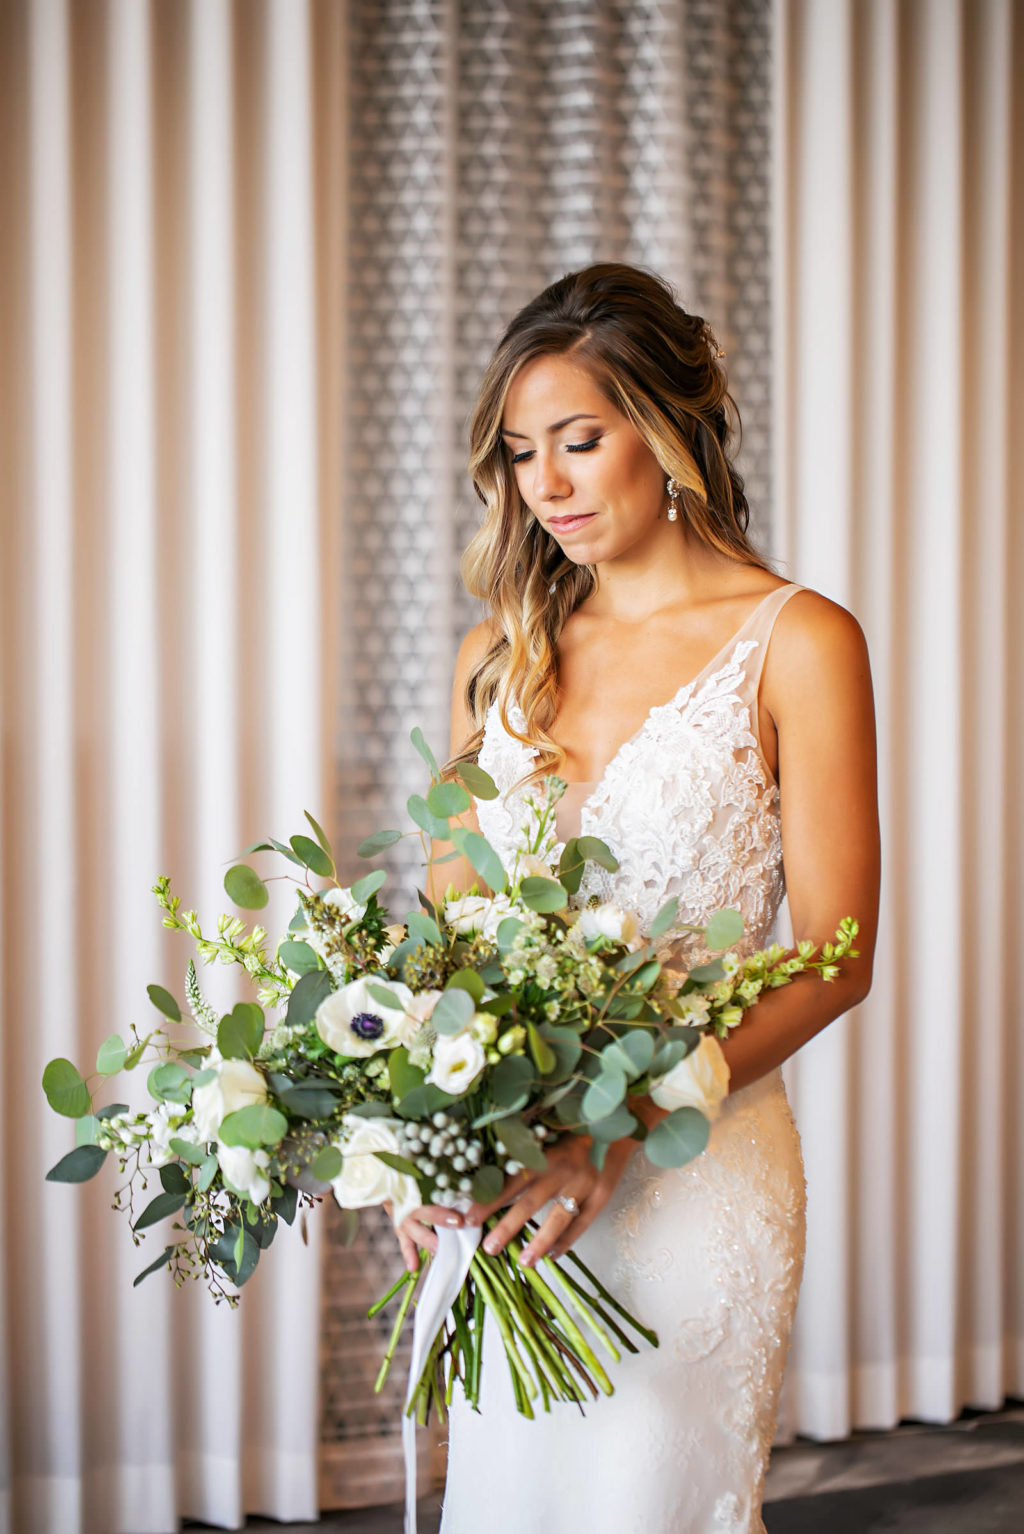 Romantic Bride Wearing Fitted Lace V Neckline Wedding Dress Holding White Anemone and Roses, Greenery and Eucalyptus Floral Bouquet | Tampa Bay Wedding Photographer Limelight Photography | Wedding Hair and Makeup Adore Bridal | Wedding Dress Truly Forever Bridal Sarasota | Wedding Florist Beneva Florals | Styled Shoot